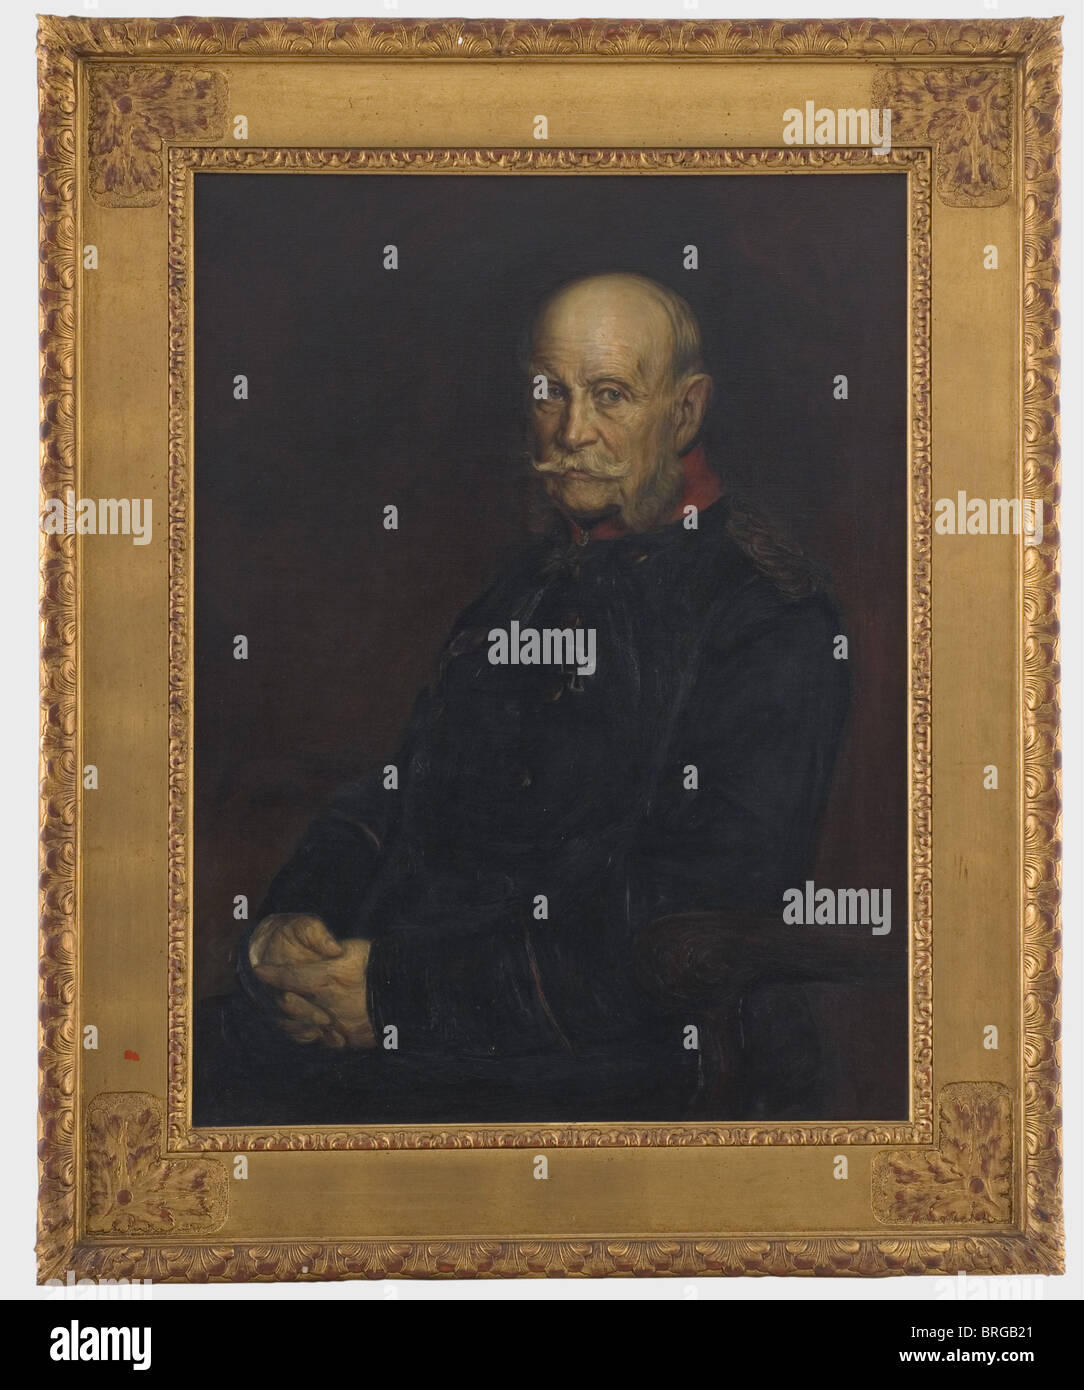 Kaiser Wilhelm I (1797 - 1888), an unsigned portrait painting, circa 1880 Oil on canvas. Half portrait, the seated emperor in uniform wearing the Pour le mérite and the Iron Cross. Gilt frame with reliefed foliage decoration. Nice work from the period of the Kaiser's reign., people, 19th century, Prussian, Prussia, German, Germany, militaria, military, object, objects, stills, clipping, clippings, cut out, cut-out, cut-outs, painting, paintings, picture, pictures, illustrations, fine arts, art, man, men, male, Stock Photo